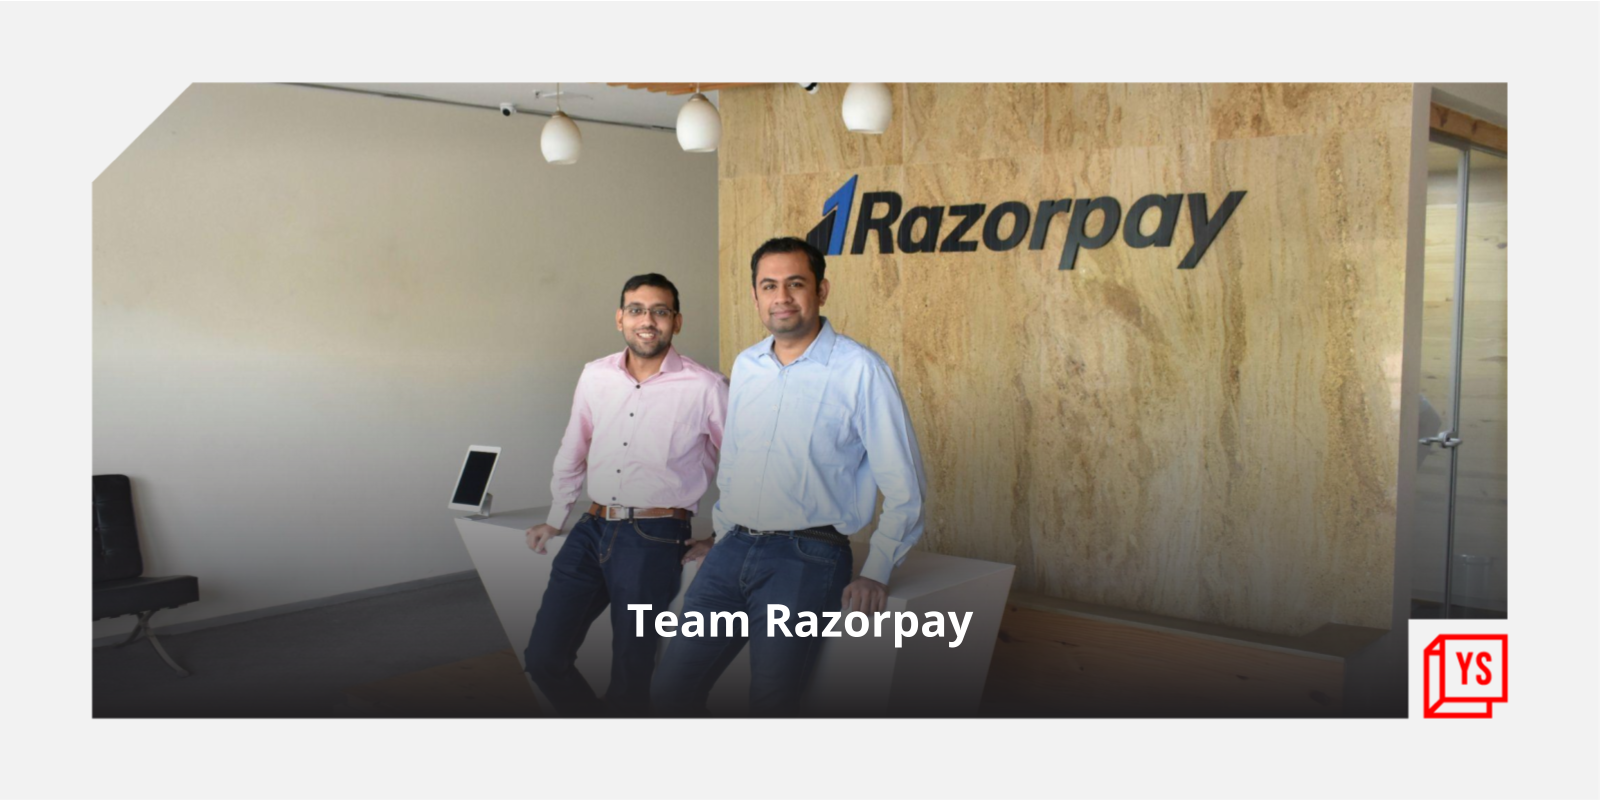 [Jobs Roundup] Fresh from $375M fundraise, fintech unicorn Razorpay is hiring across roles